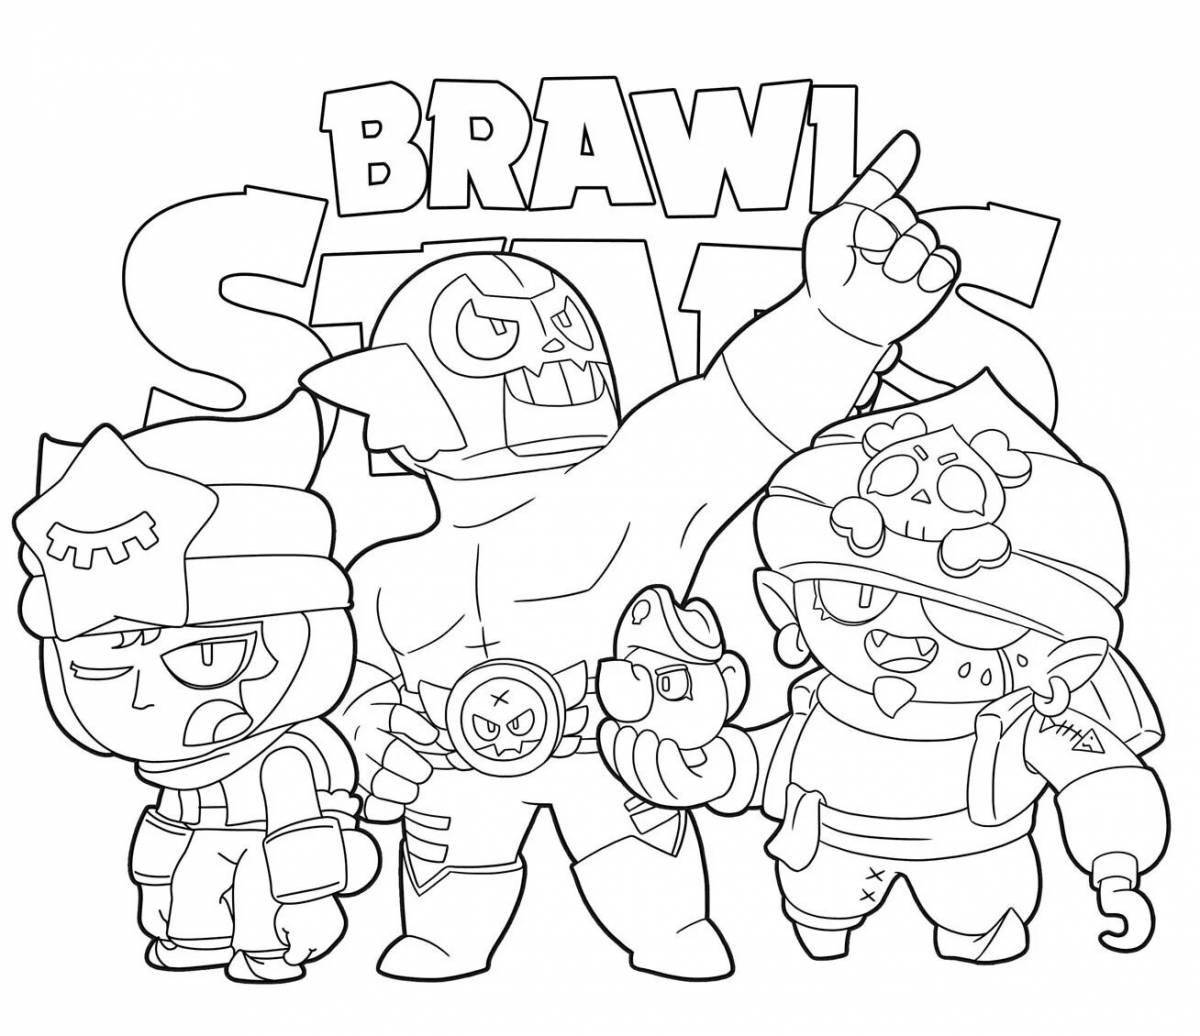 Colourful fighters brawl stars coloring book